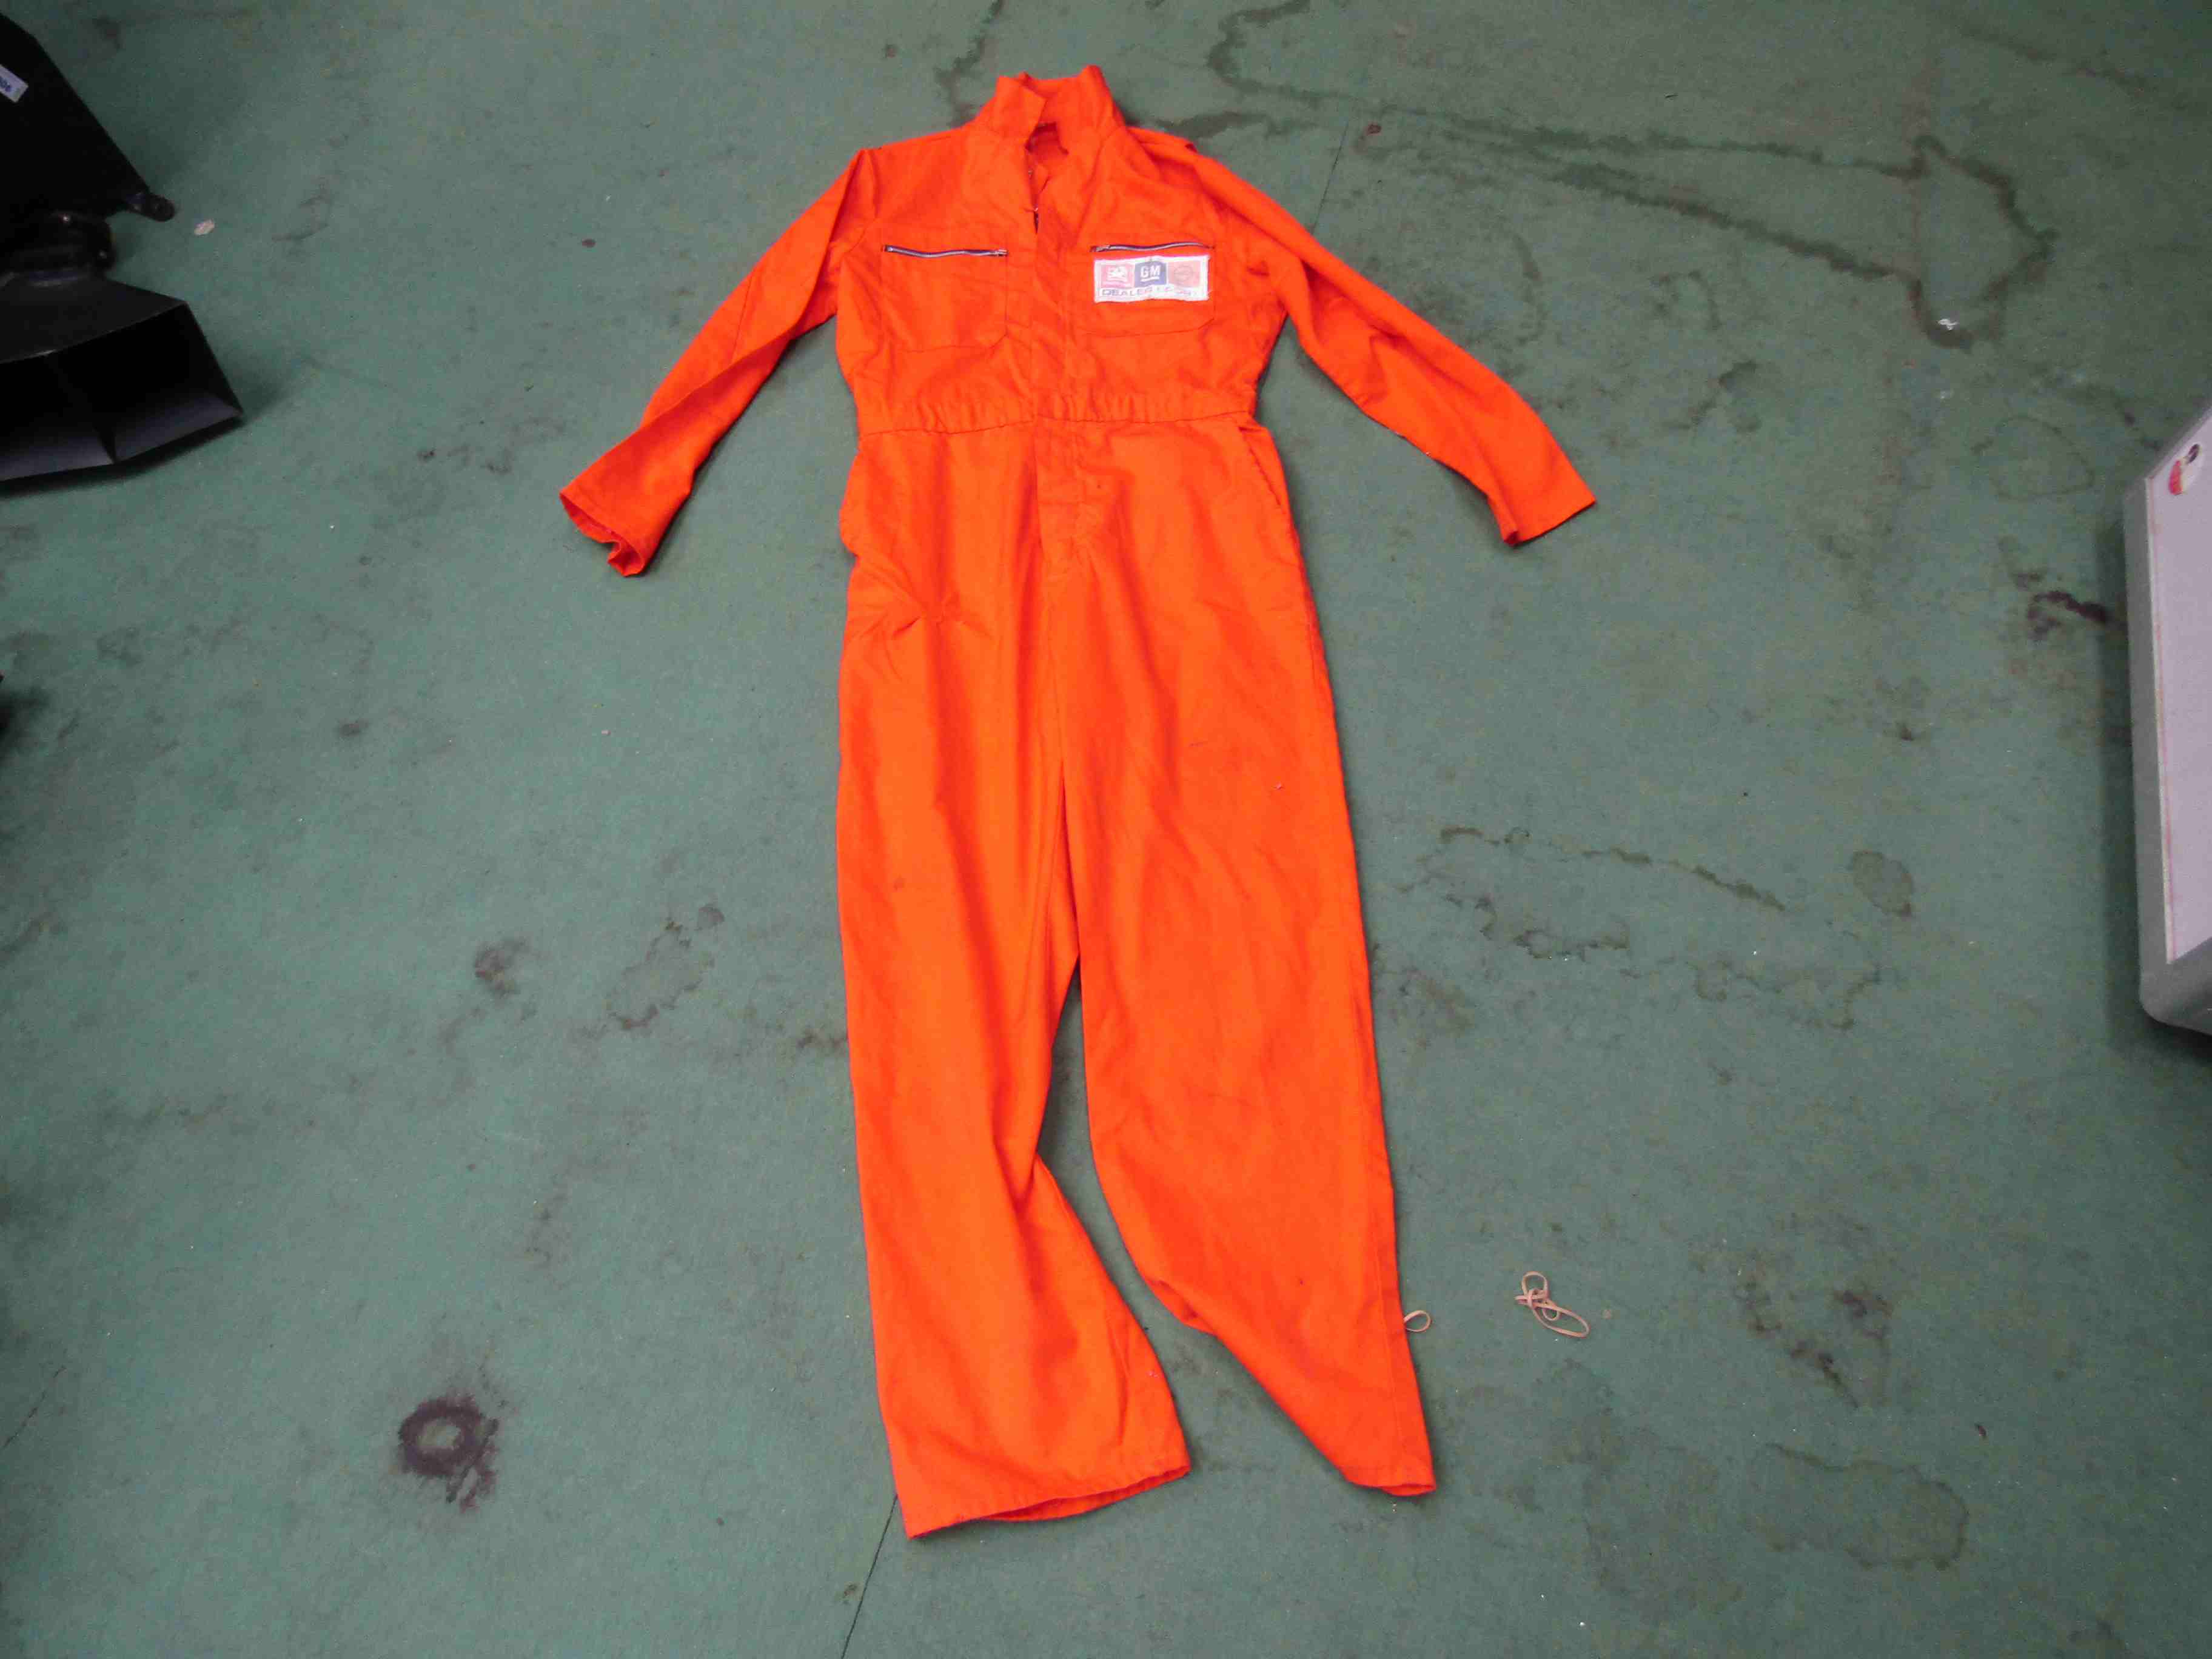 A pair of GM overalls